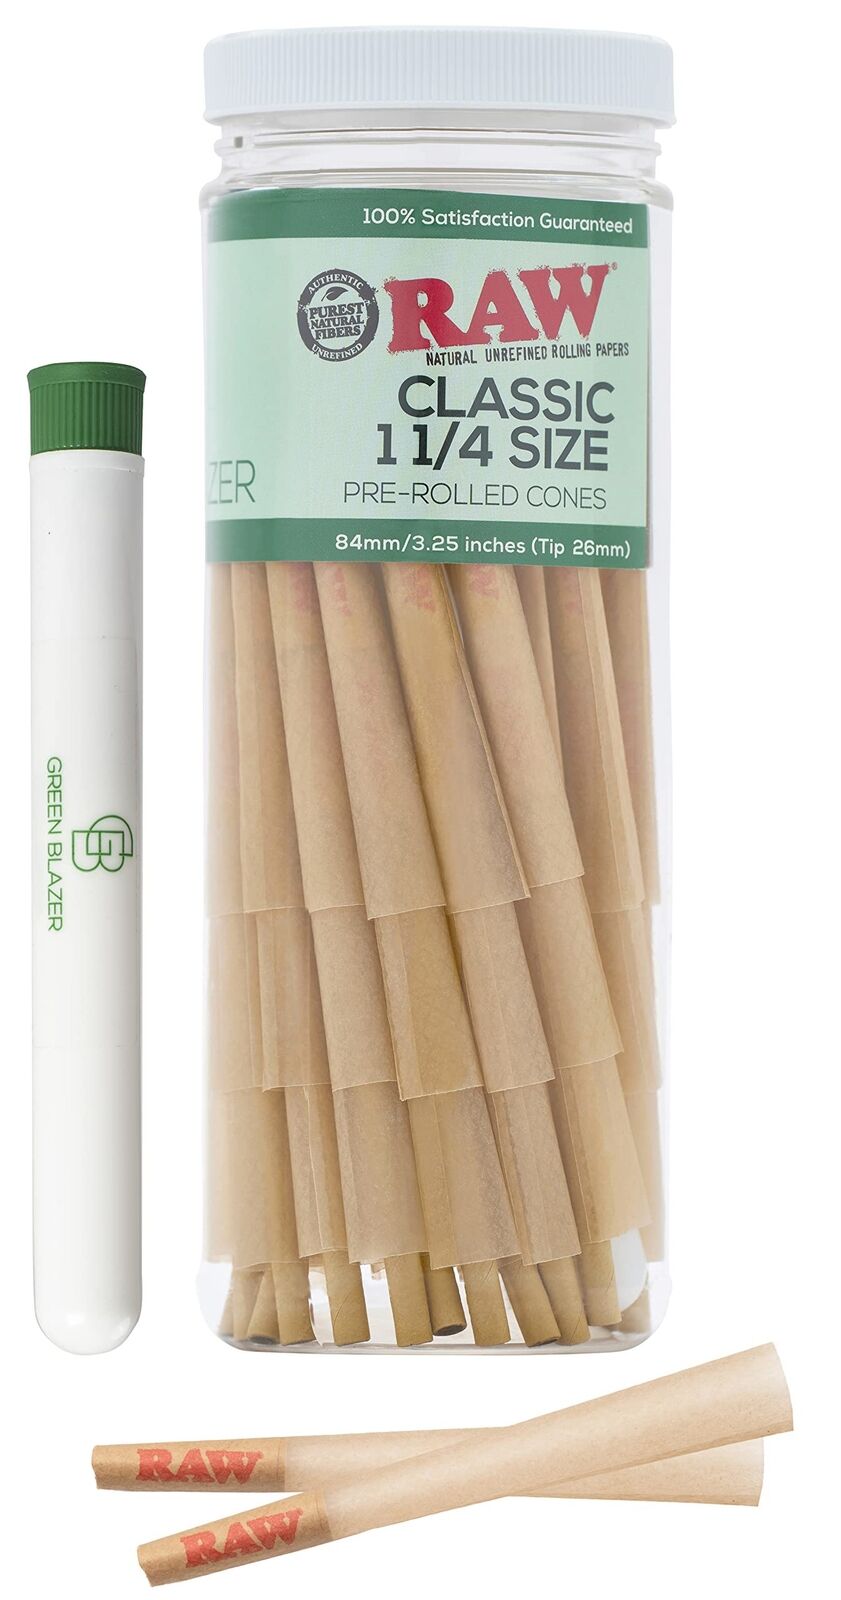 RAW Cones Classic 1 1/4 Size: 100 Pack